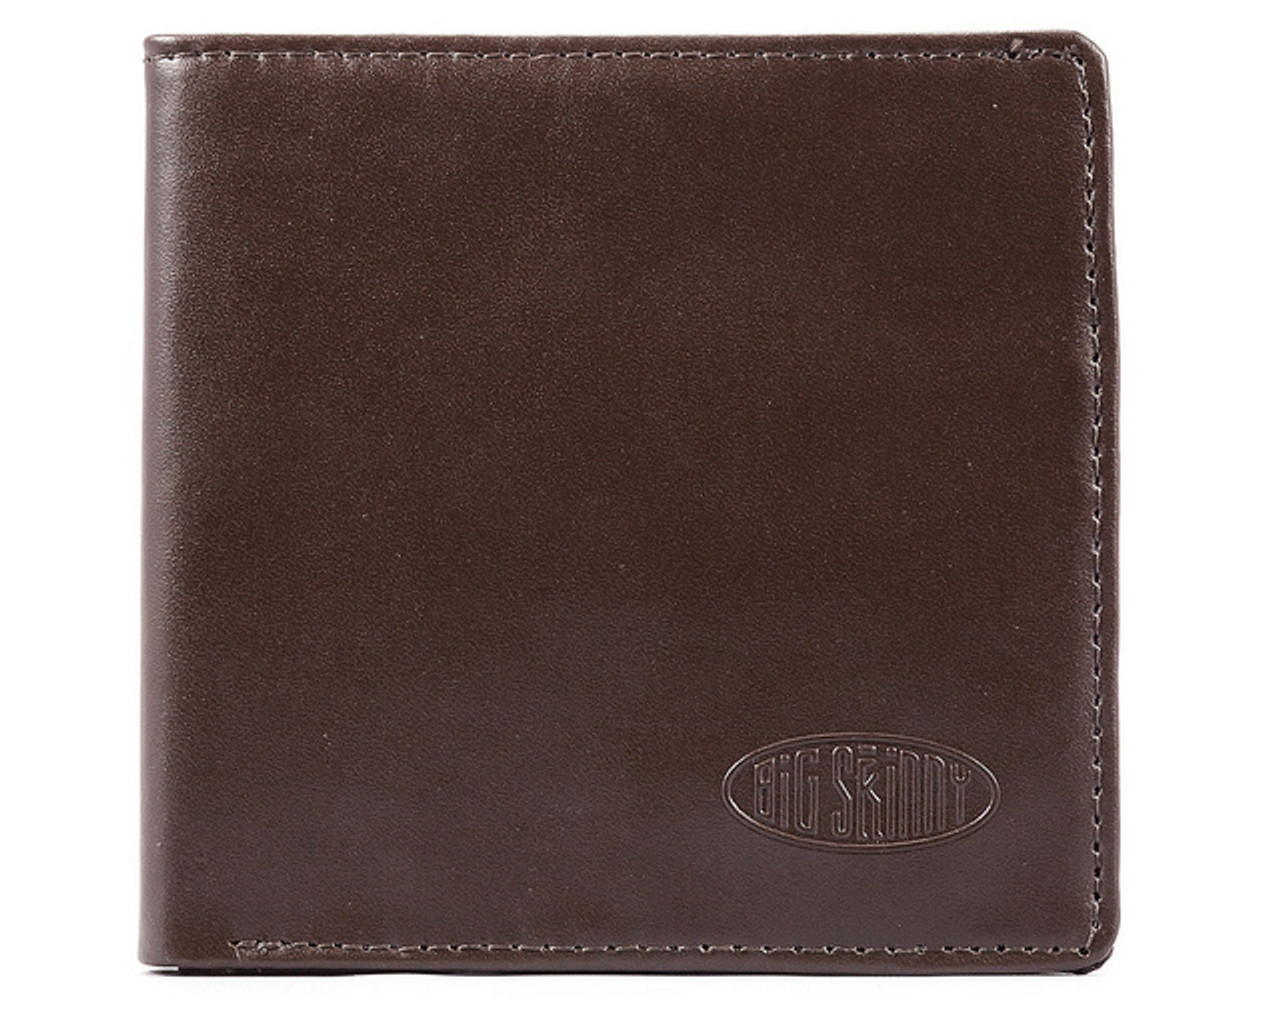 Leather Hybrid Wallet with Zipper Pocket